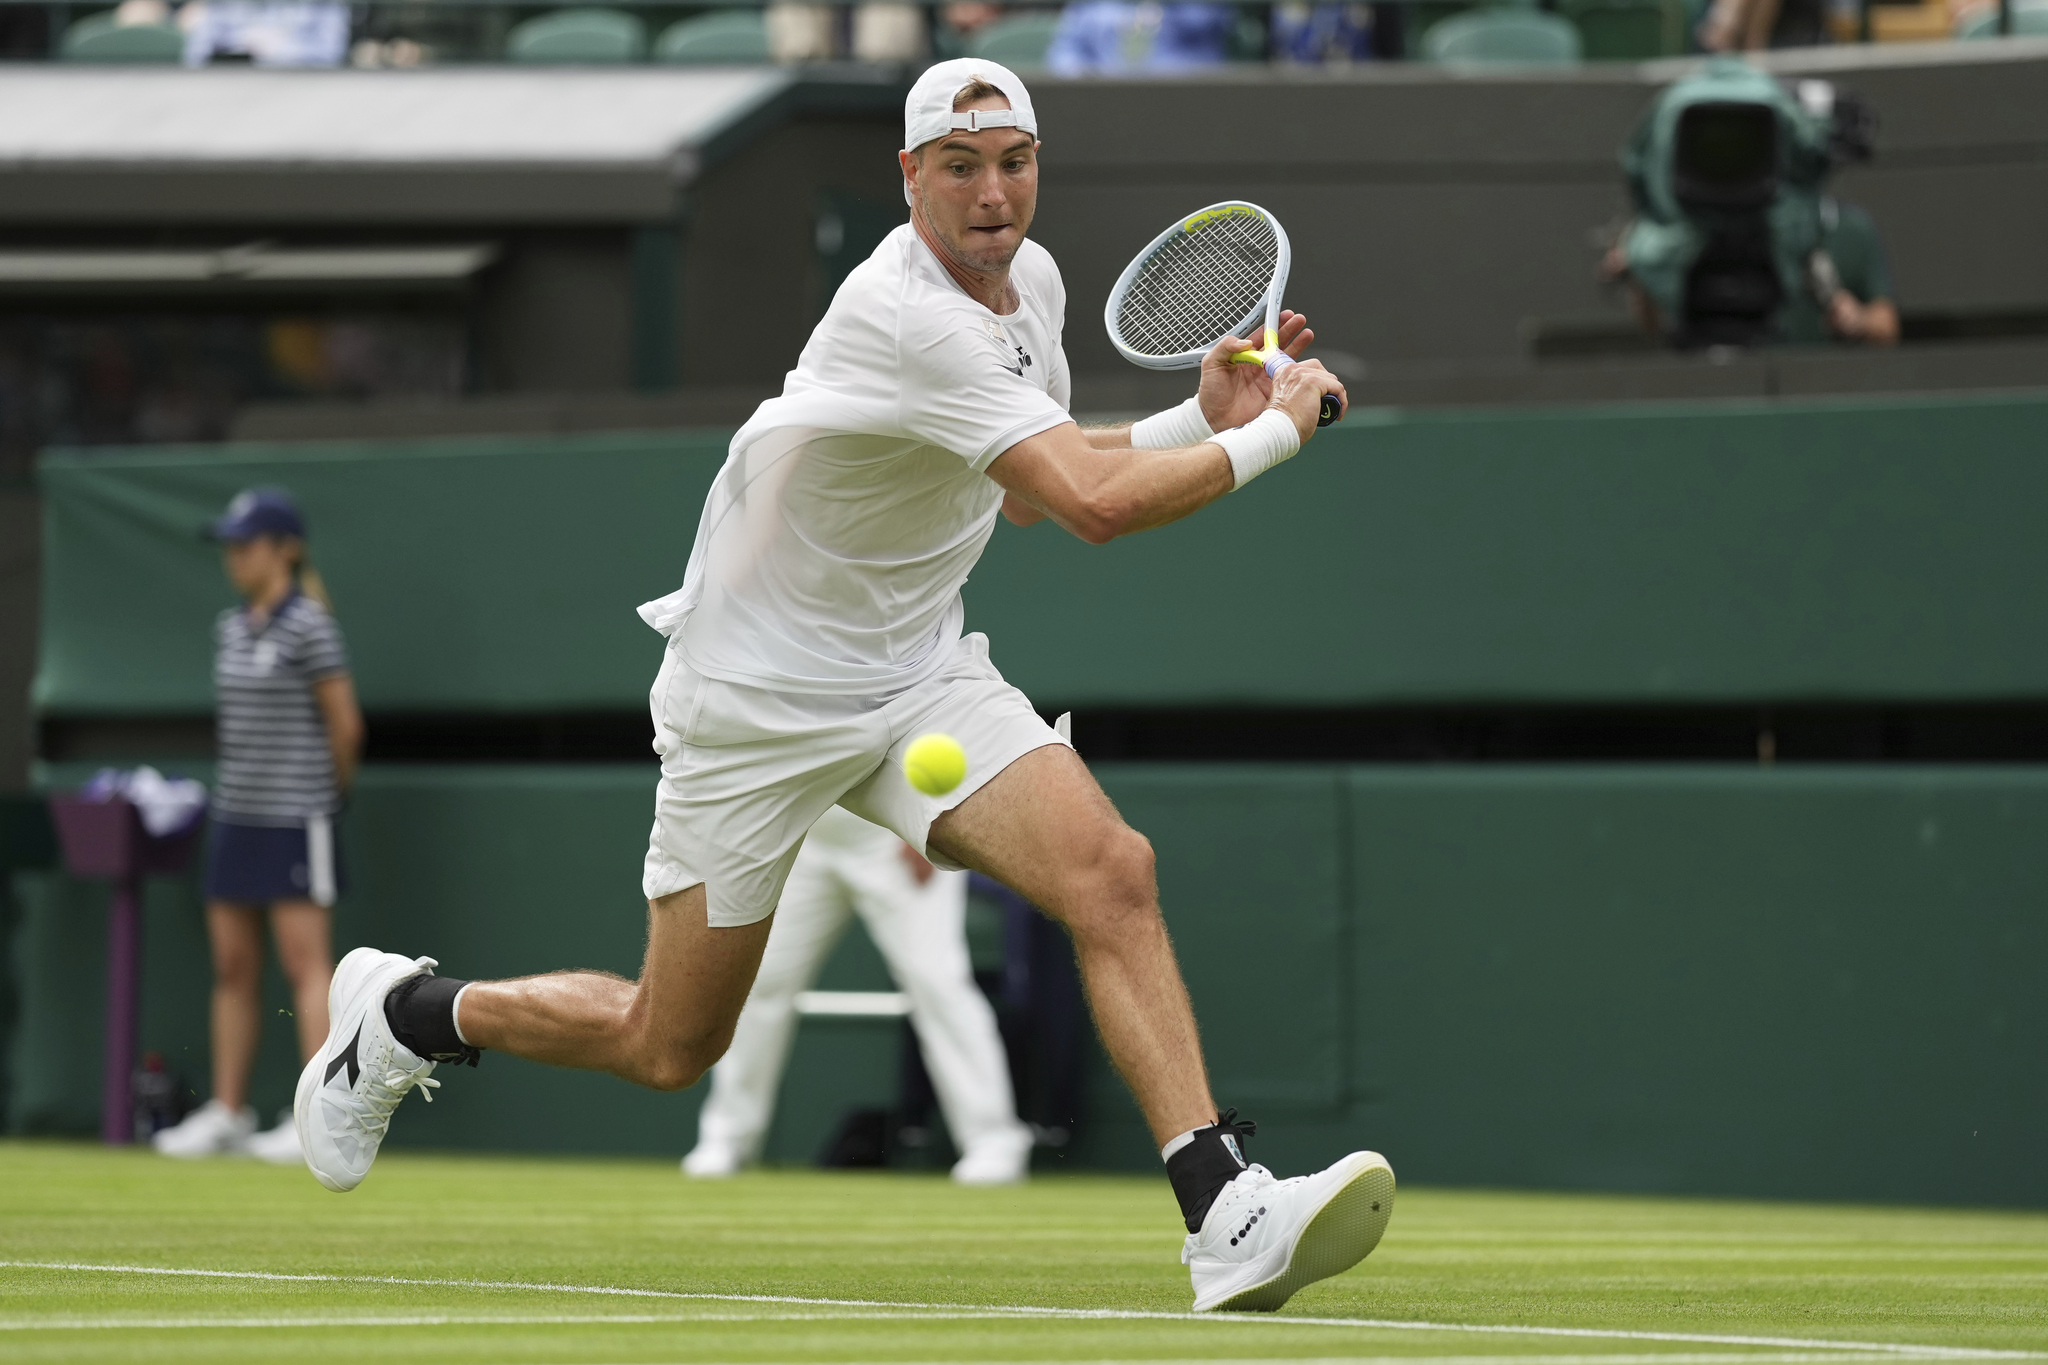 Germany's Jan-Lennard  lt;HIT gt;Struff lt;/HIT gt; returns the ball to Spain's Carlos Alcaraz during their men's singles tennis match on day one of the Wimbledon tennis championships in London, Monday, June 27, 2022. (AP Photo/Alberto Pezzali)